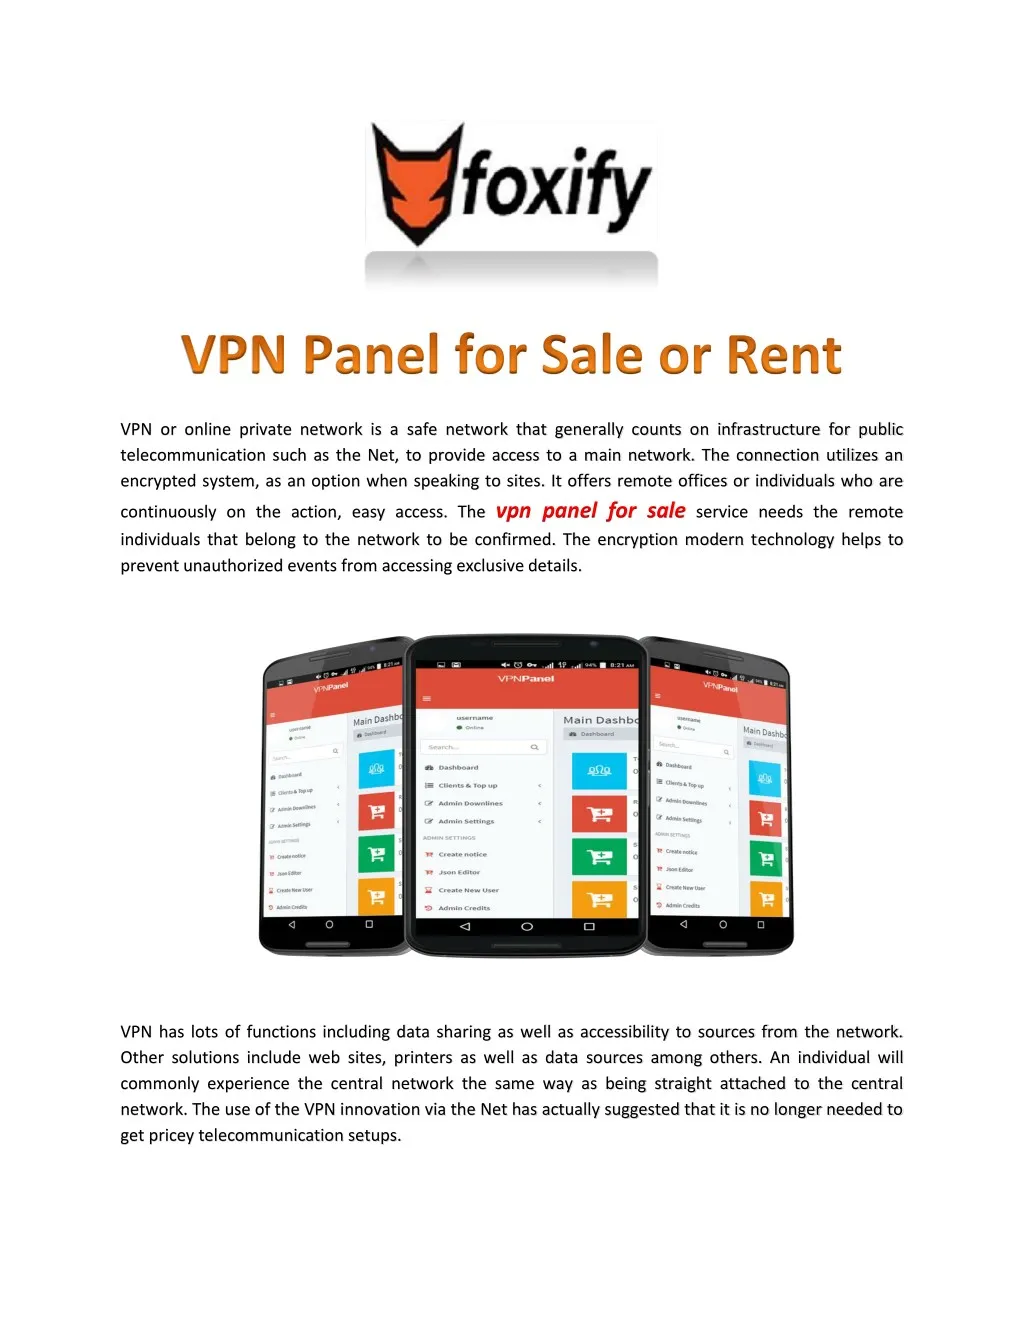 vpn or online private network is a safe network